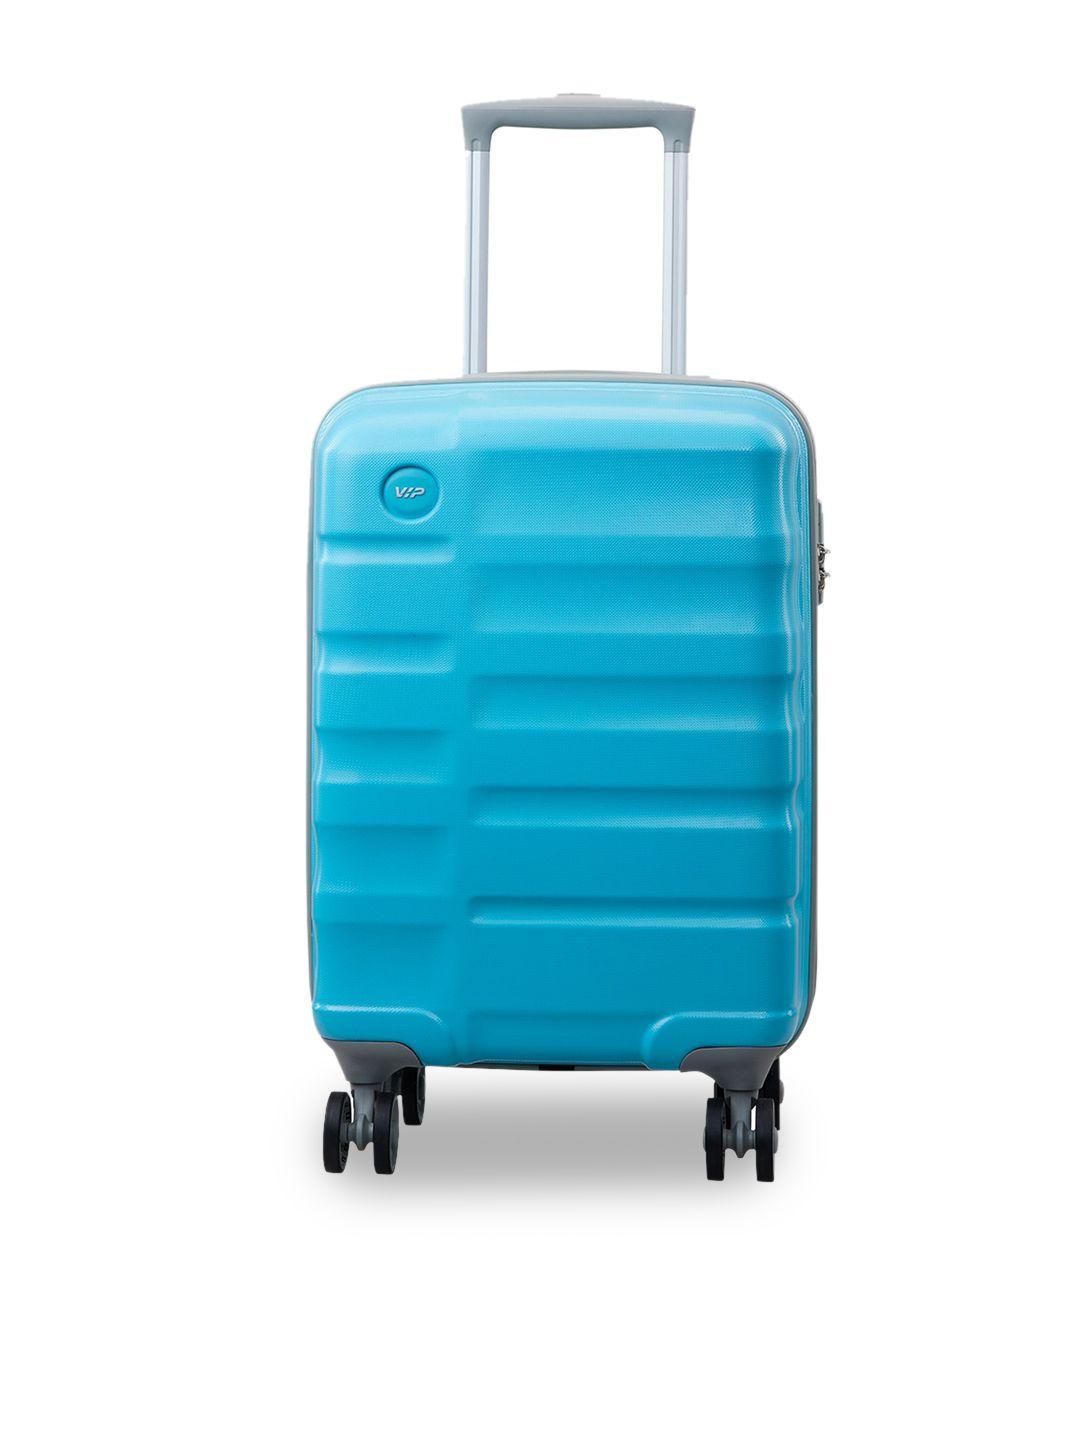 vip textured hard-sided trolley suitcase